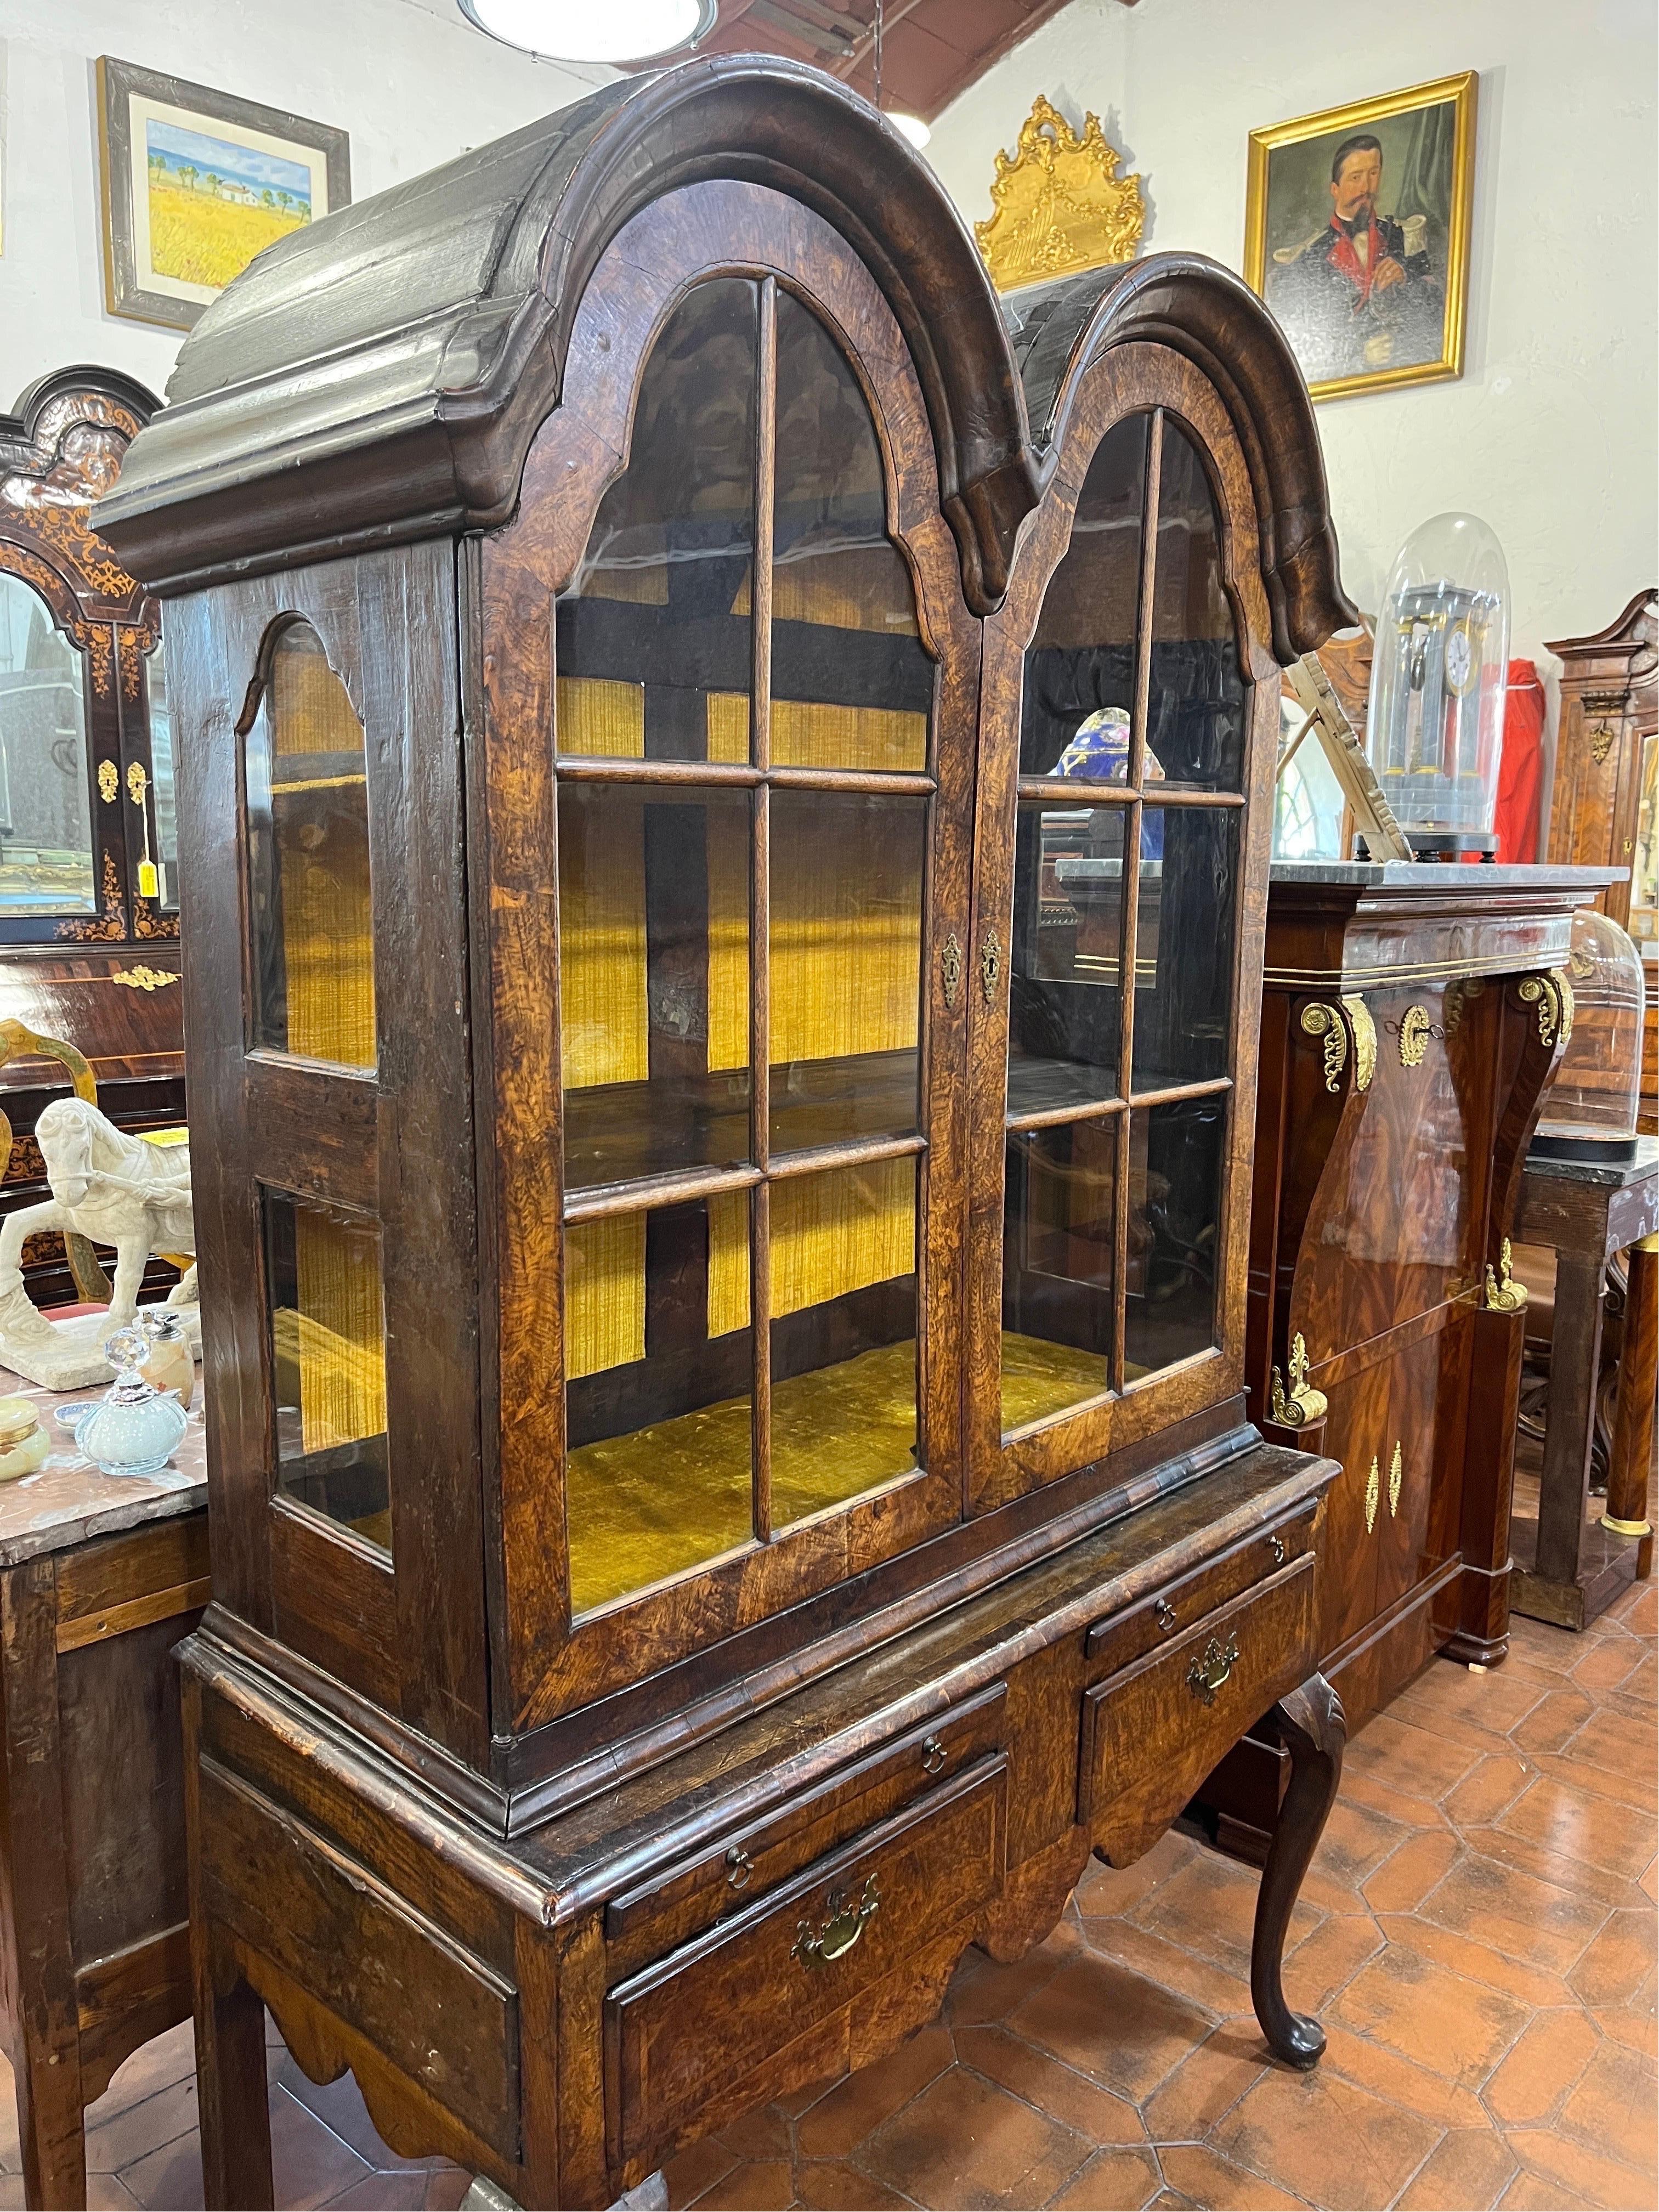 Fantastic and Rare display cabinet double dome Of  English provenance, made of oak wood and walnut burl. Original hardware. No replacement work in either front or back.
Cabinet in excellent state of preservation. Rare in this condition.
We will only